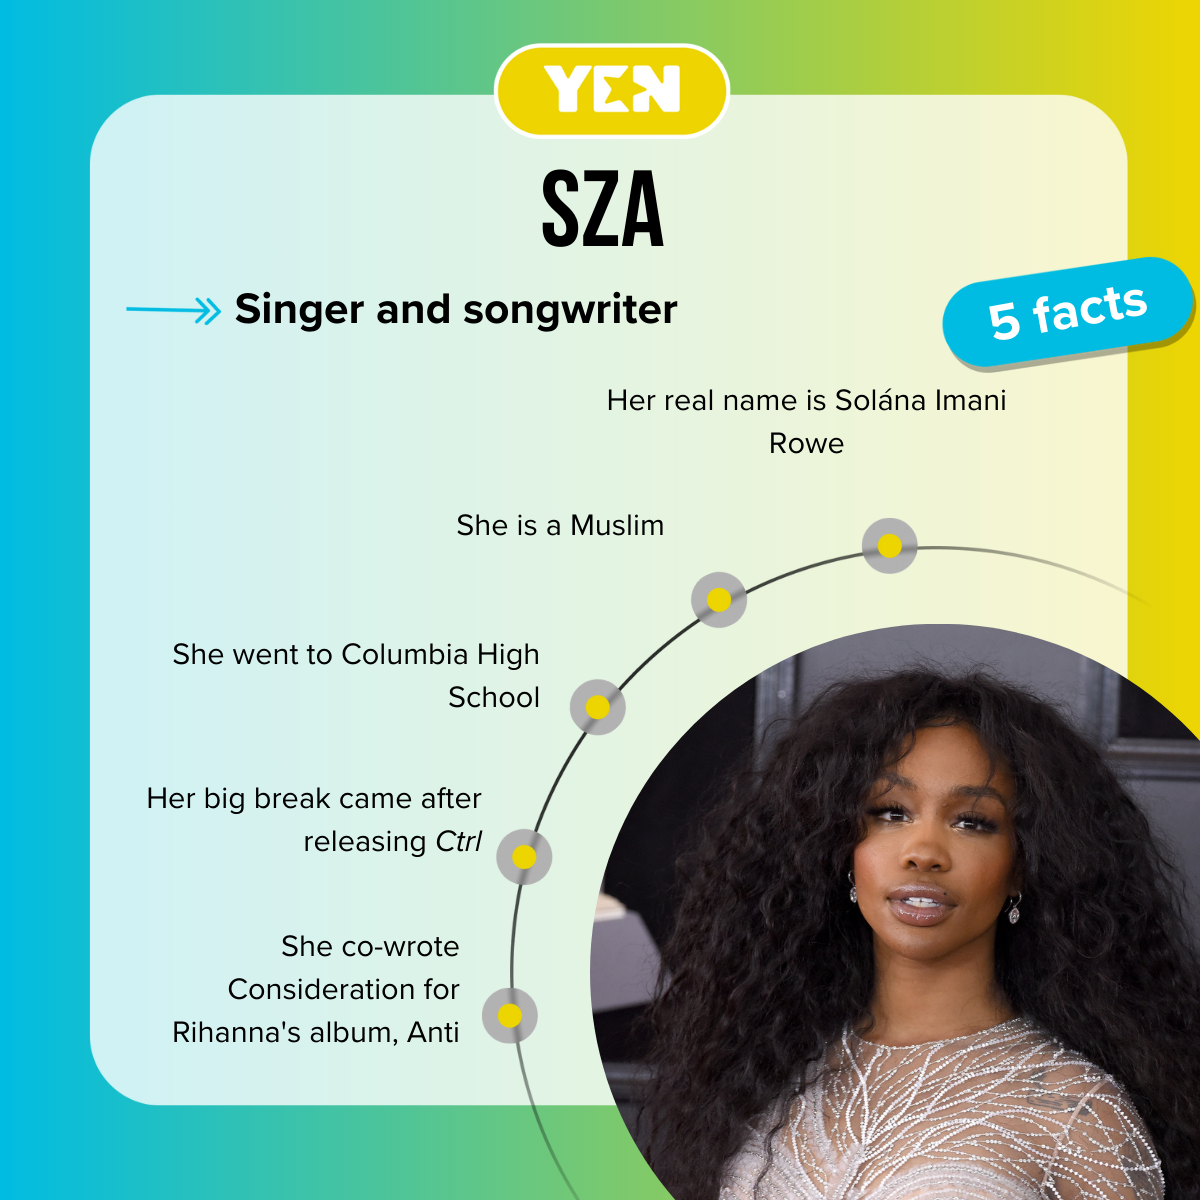 Top-5 facts about SZA